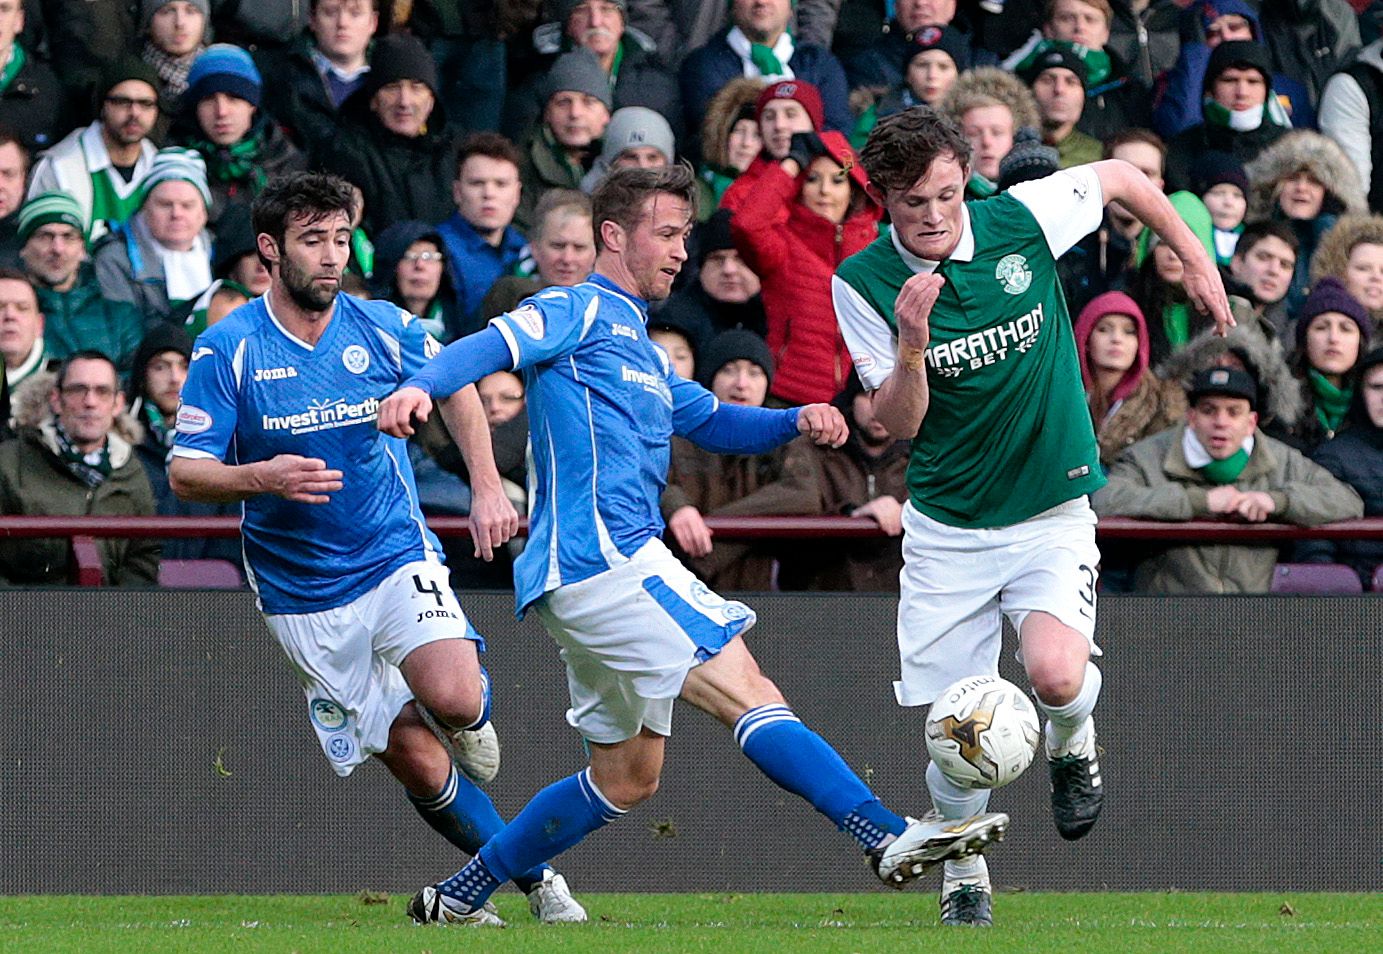 Football Soccer - Hibernian v St Johnstone - Scottish League Cup Semi Final - Tynecastle, Edinburgh, Scotland - 30/1/16 
St Johnstone's Chris Millar (C) fouls  Hibernian's Liam Henderson (R) to concede a penalty 
Action Images via Reuters / Graham Stuart 
Livepic 
EDITORIAL USE ONLY. No use with unauthorized audio, video, data, fixture lists, club/league logos or 